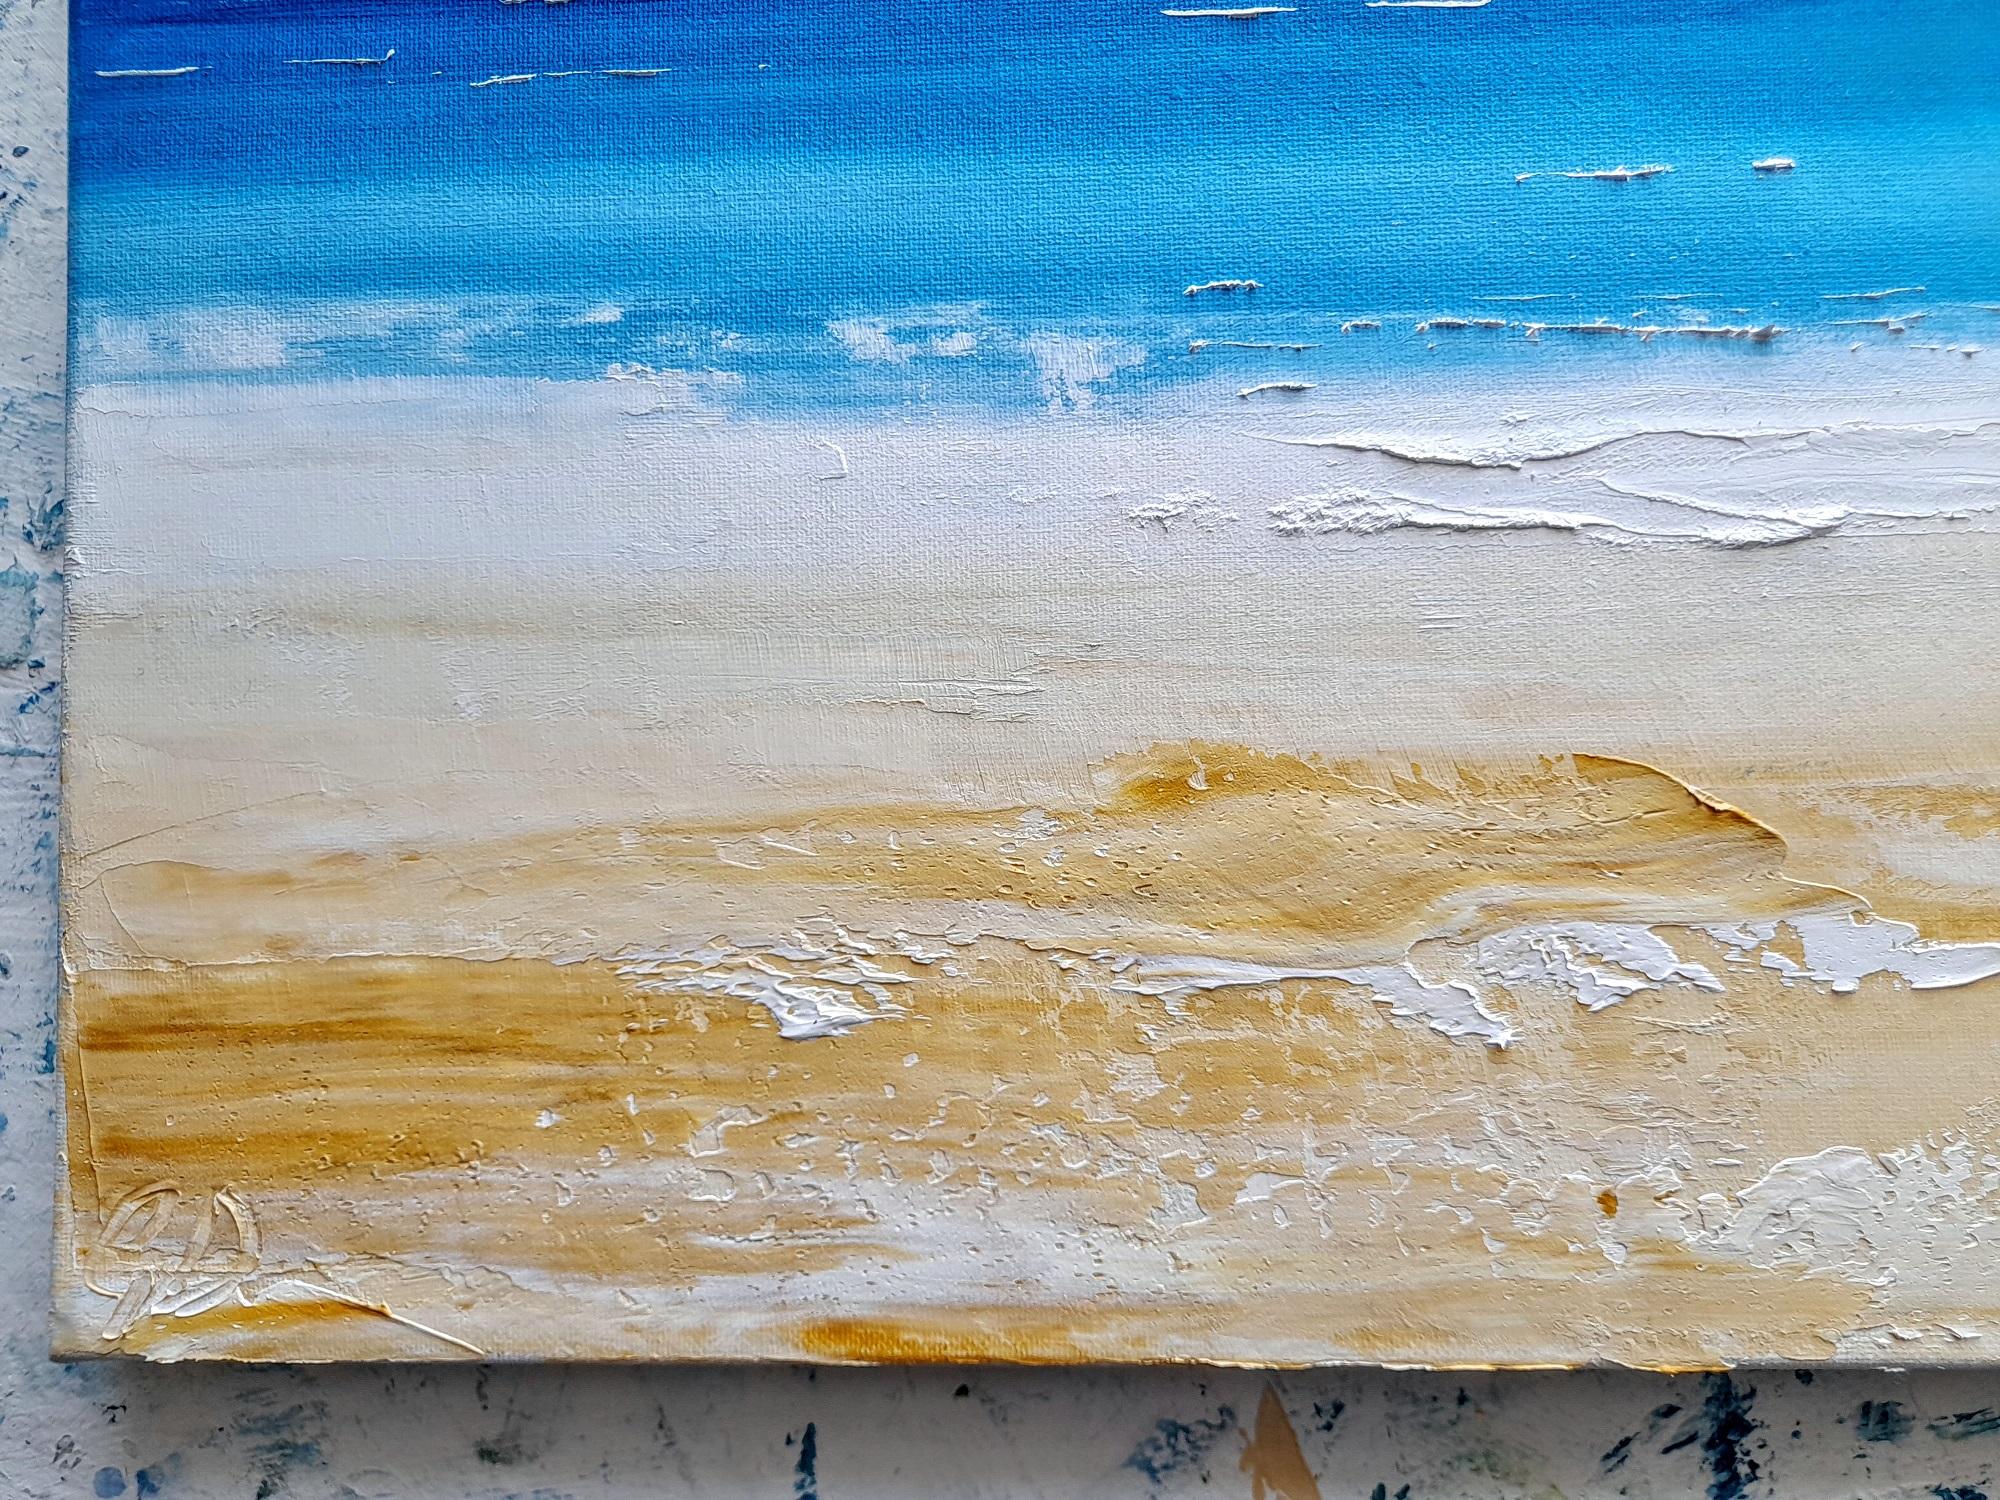 Refreshing Days at the Beach, seascape art, original art, affordable art - Contemporary Painting by Georgie Dowling